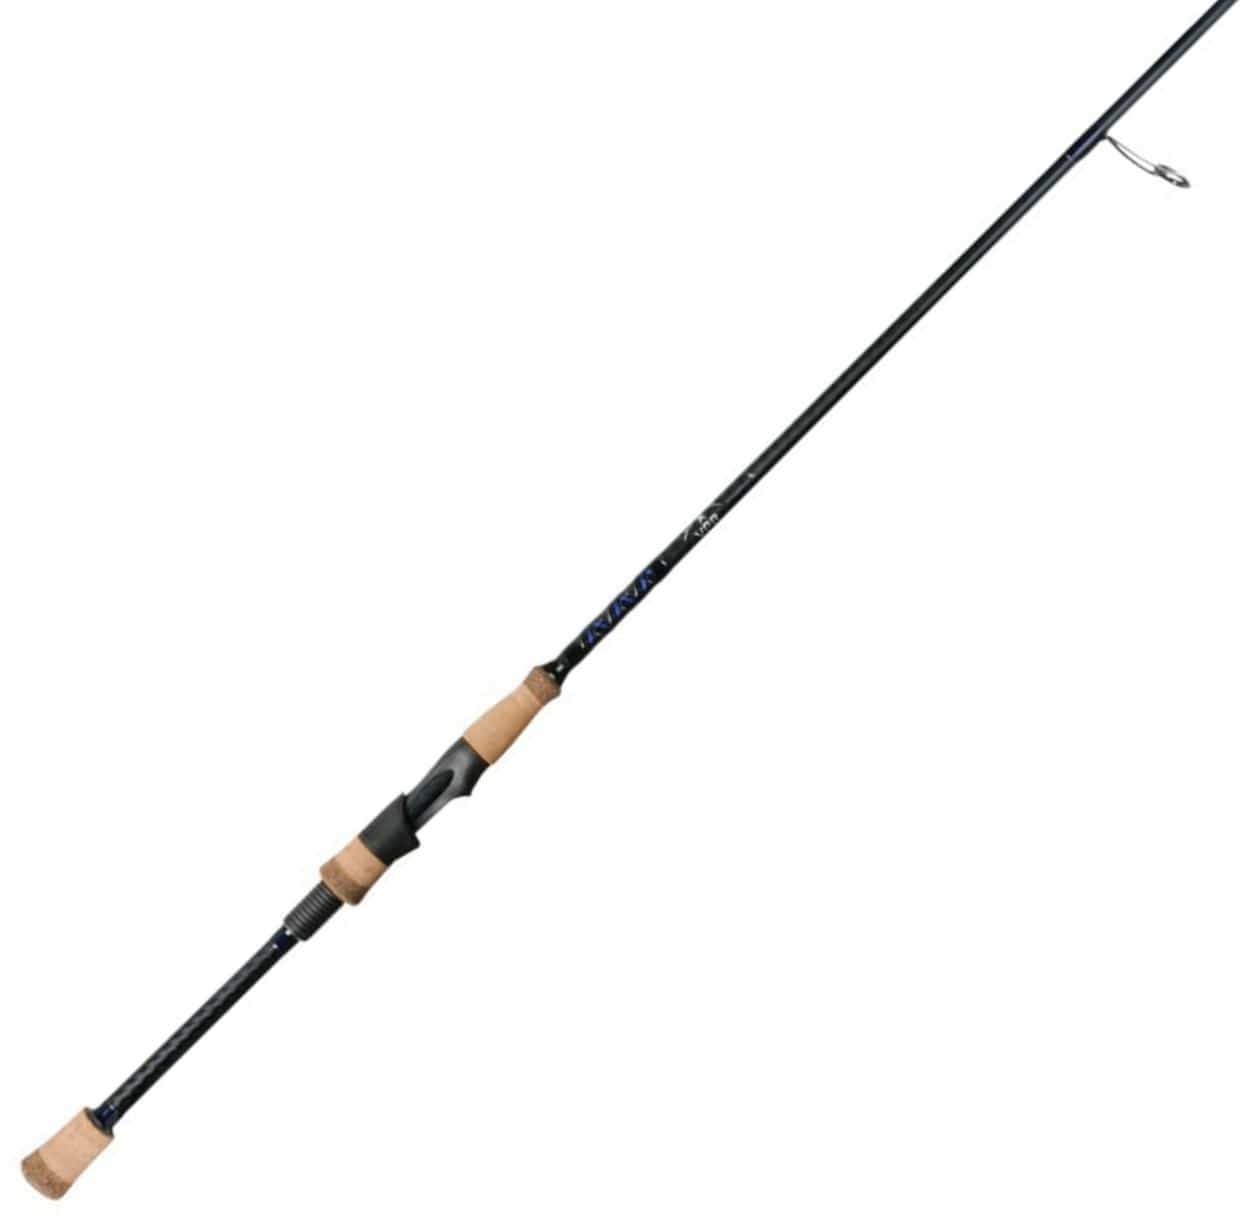 Sales and Clearance Fishing Gear - The Saltwater Edge